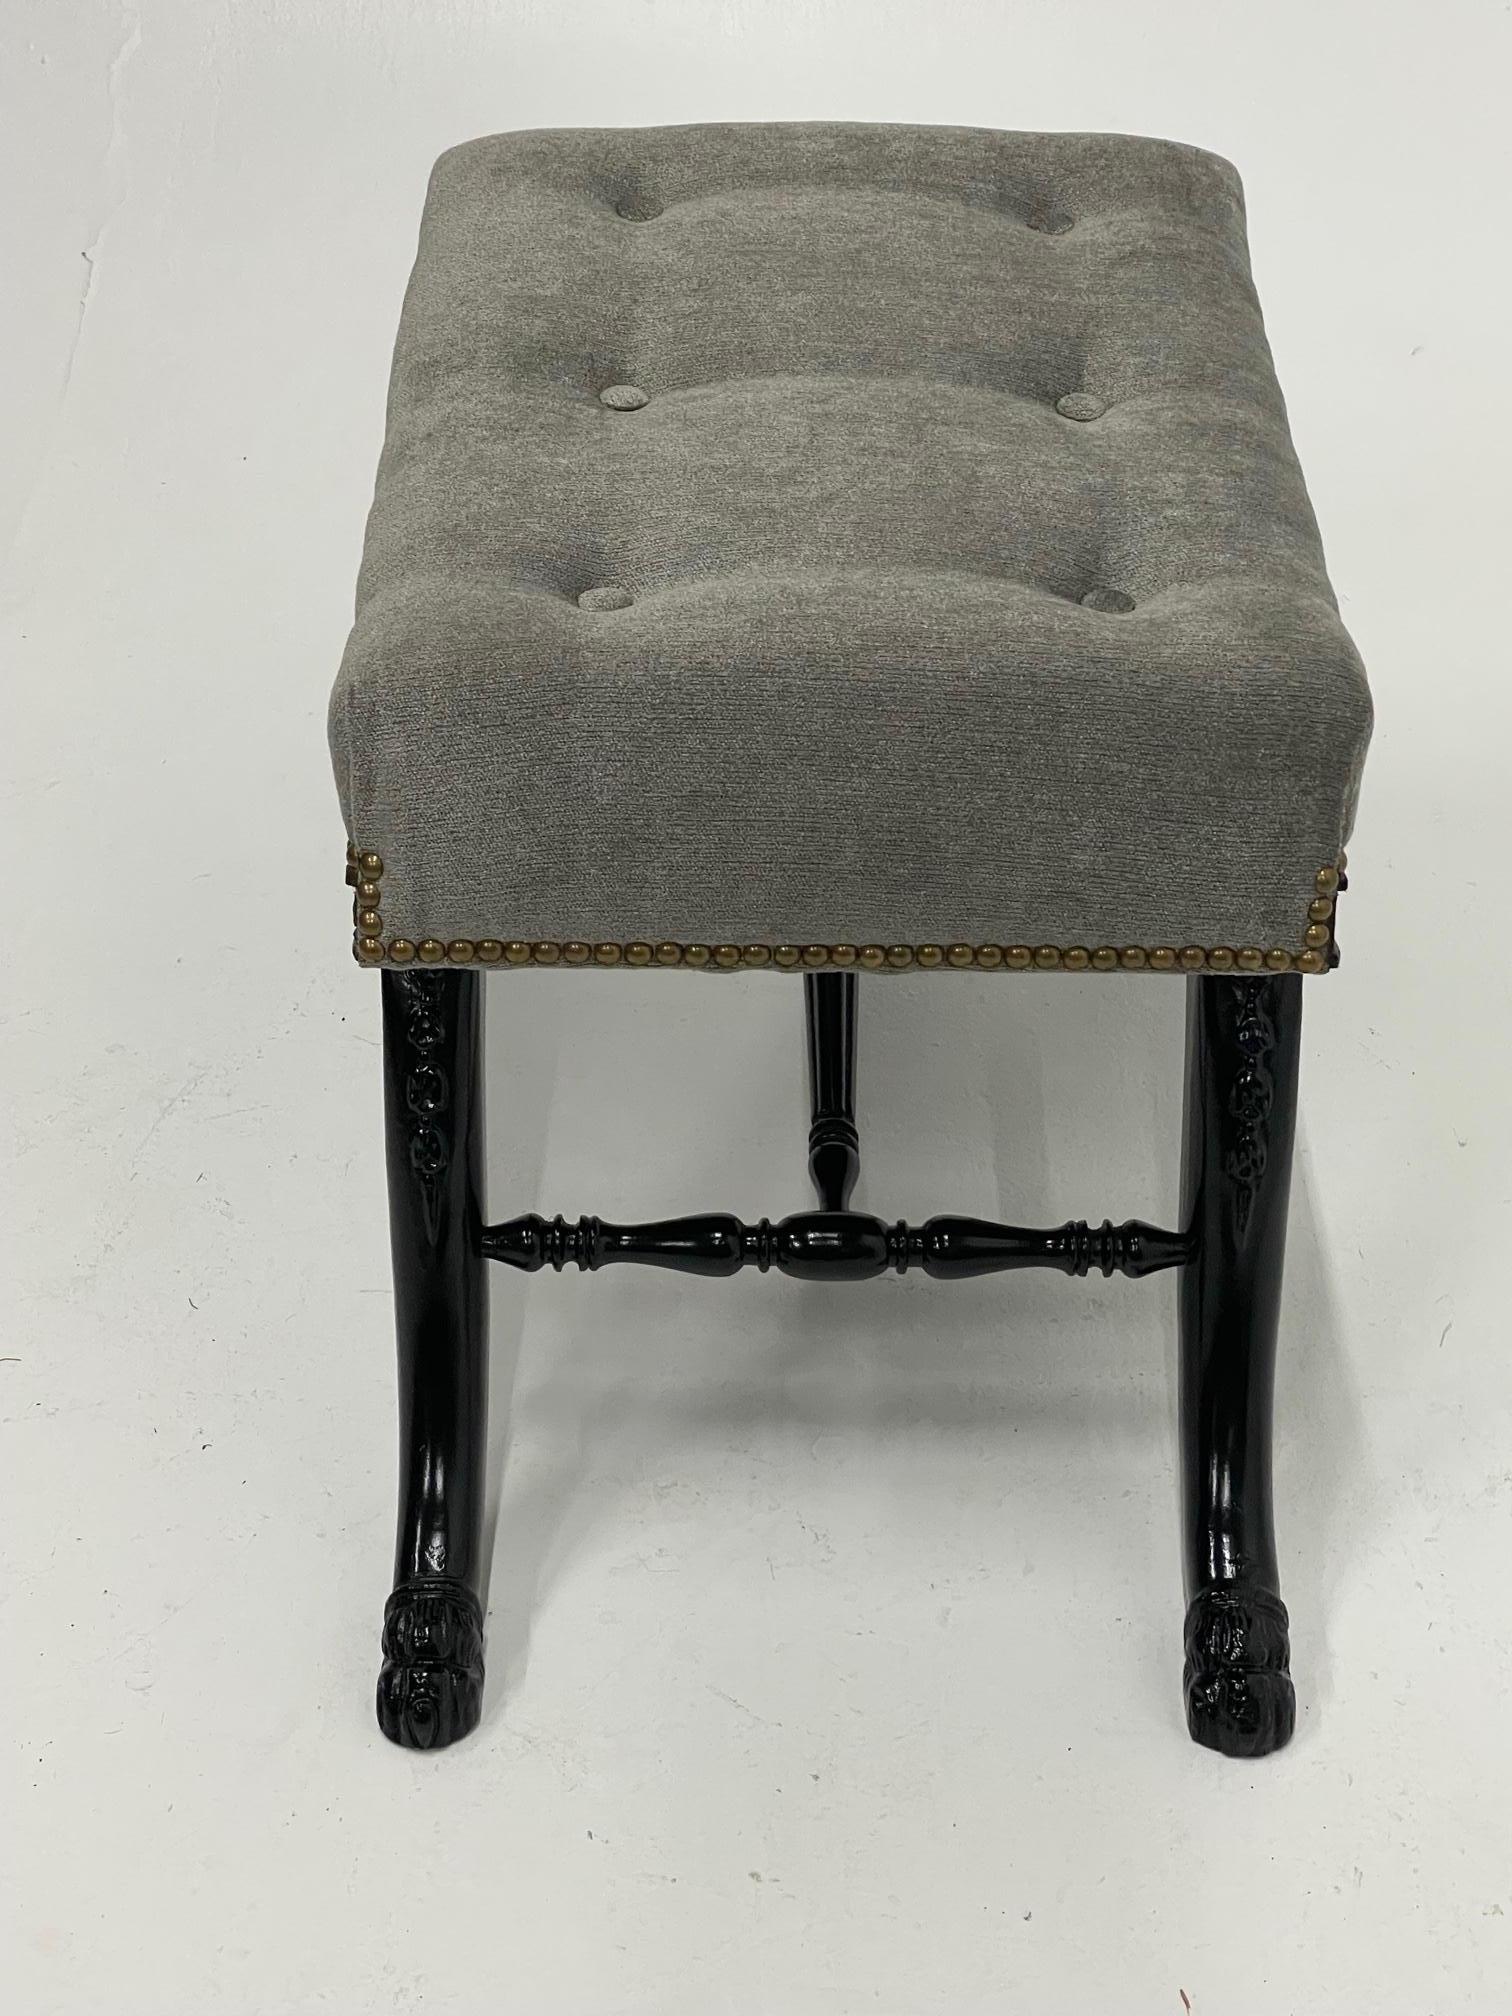 Super handsome Hollywood Regency ebonized carved wood bench having sabre legs that terminate in paw feet and elegant stretcher bars underneath a refined grey flannel tufted seat finished with nailheads.